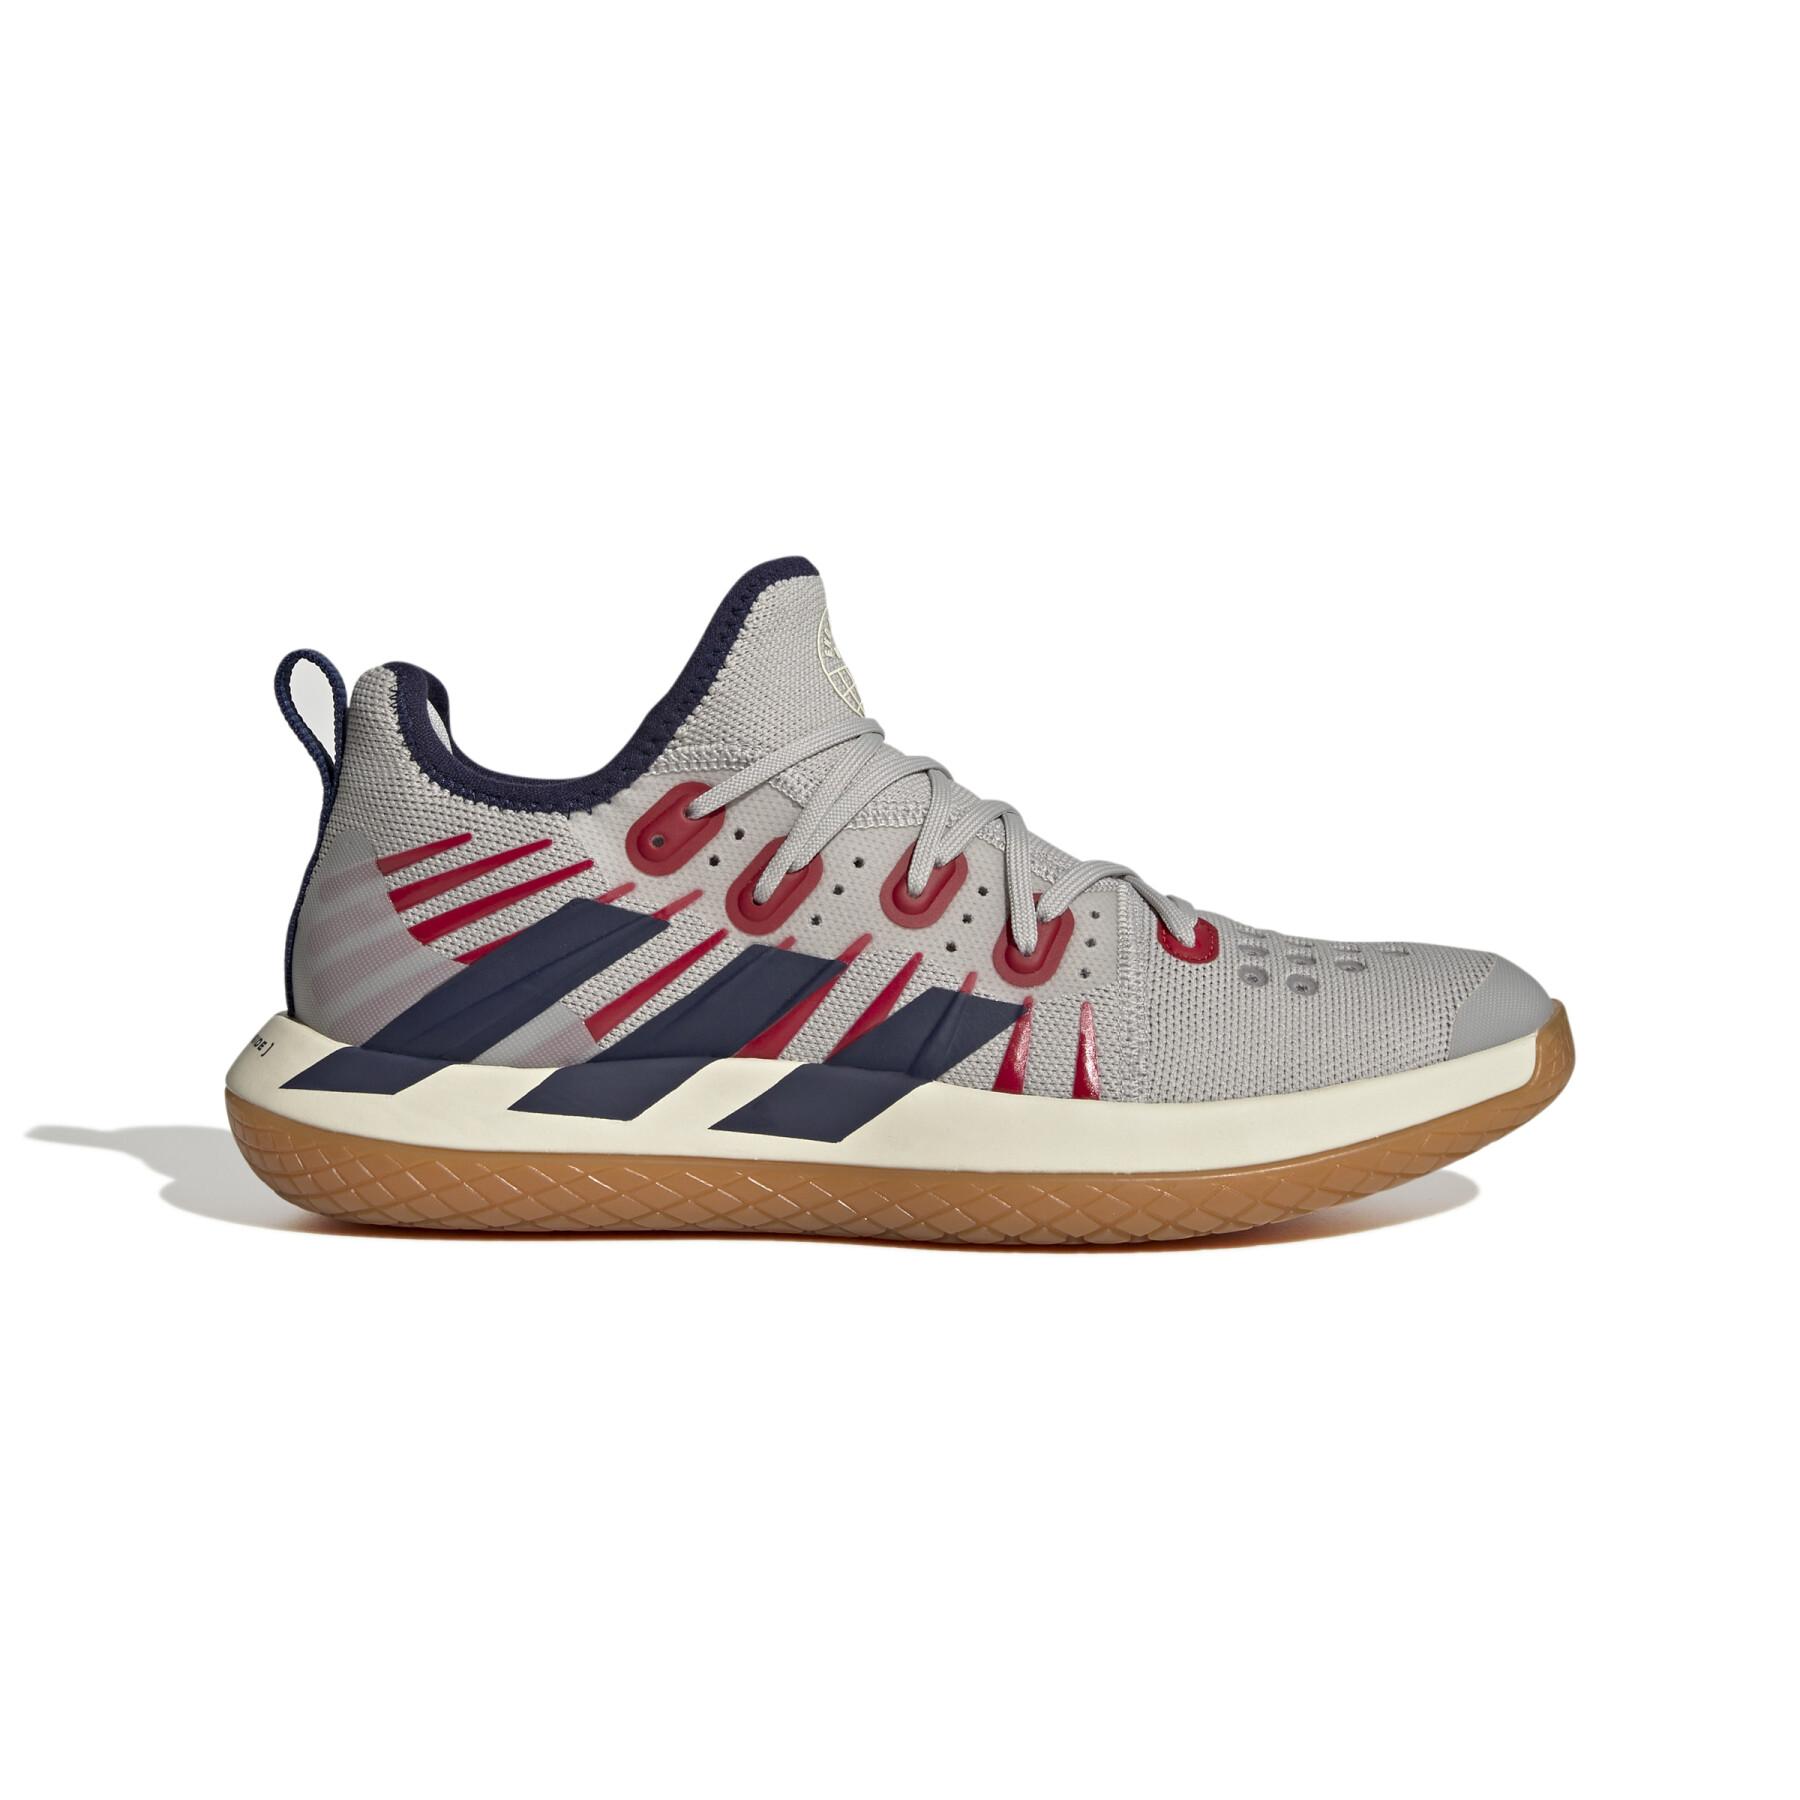 Indoor shoes adidas Stabil Next 2.0 - Stabil - adidas - Shoes